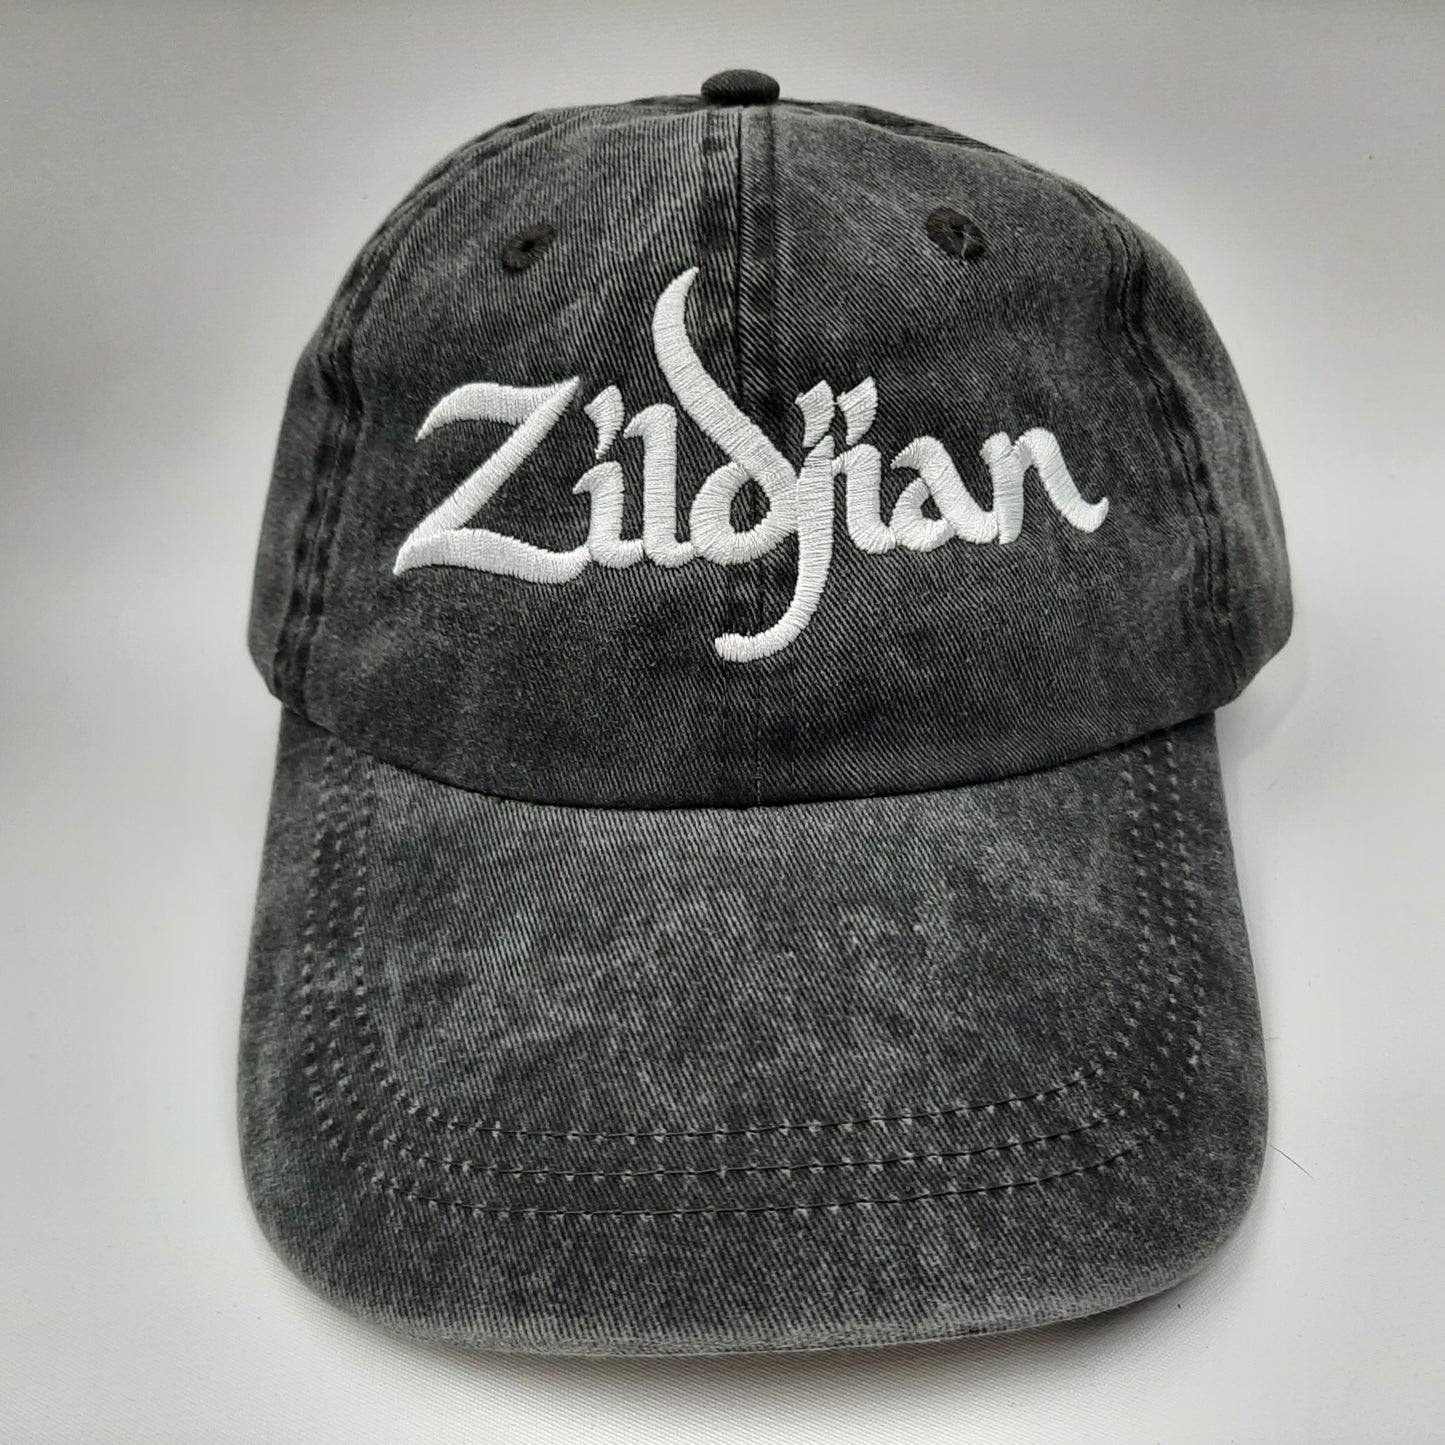 Zildjian Embroidered Relaxed Cotton Dad Hat Cap Gray Washed